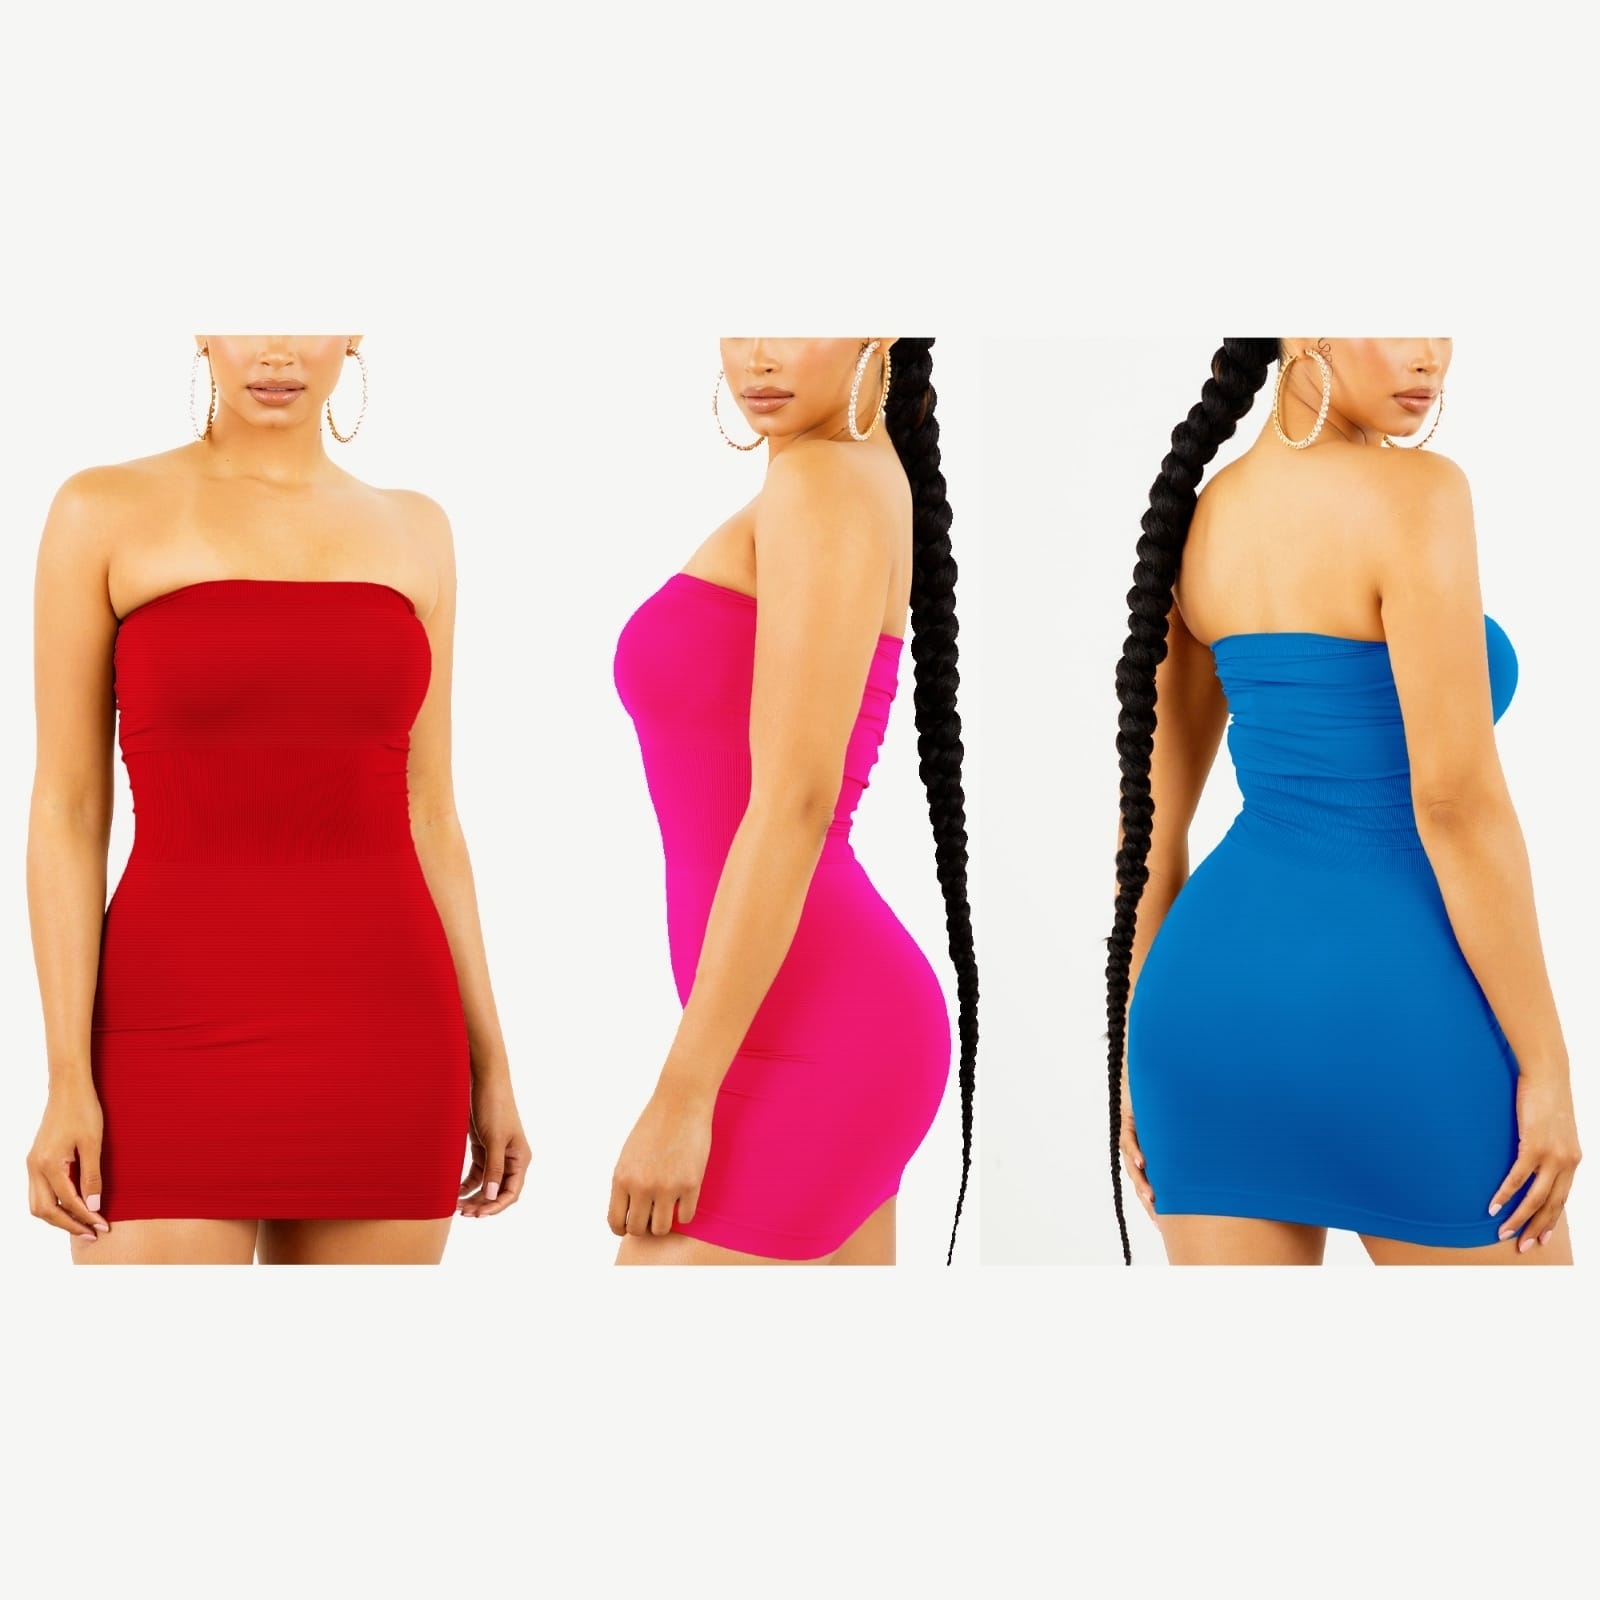 2-Pack Women's Strapless Stretchy Tight Fit Seamless Body Con Mini Tube Top Dress - RED, XS